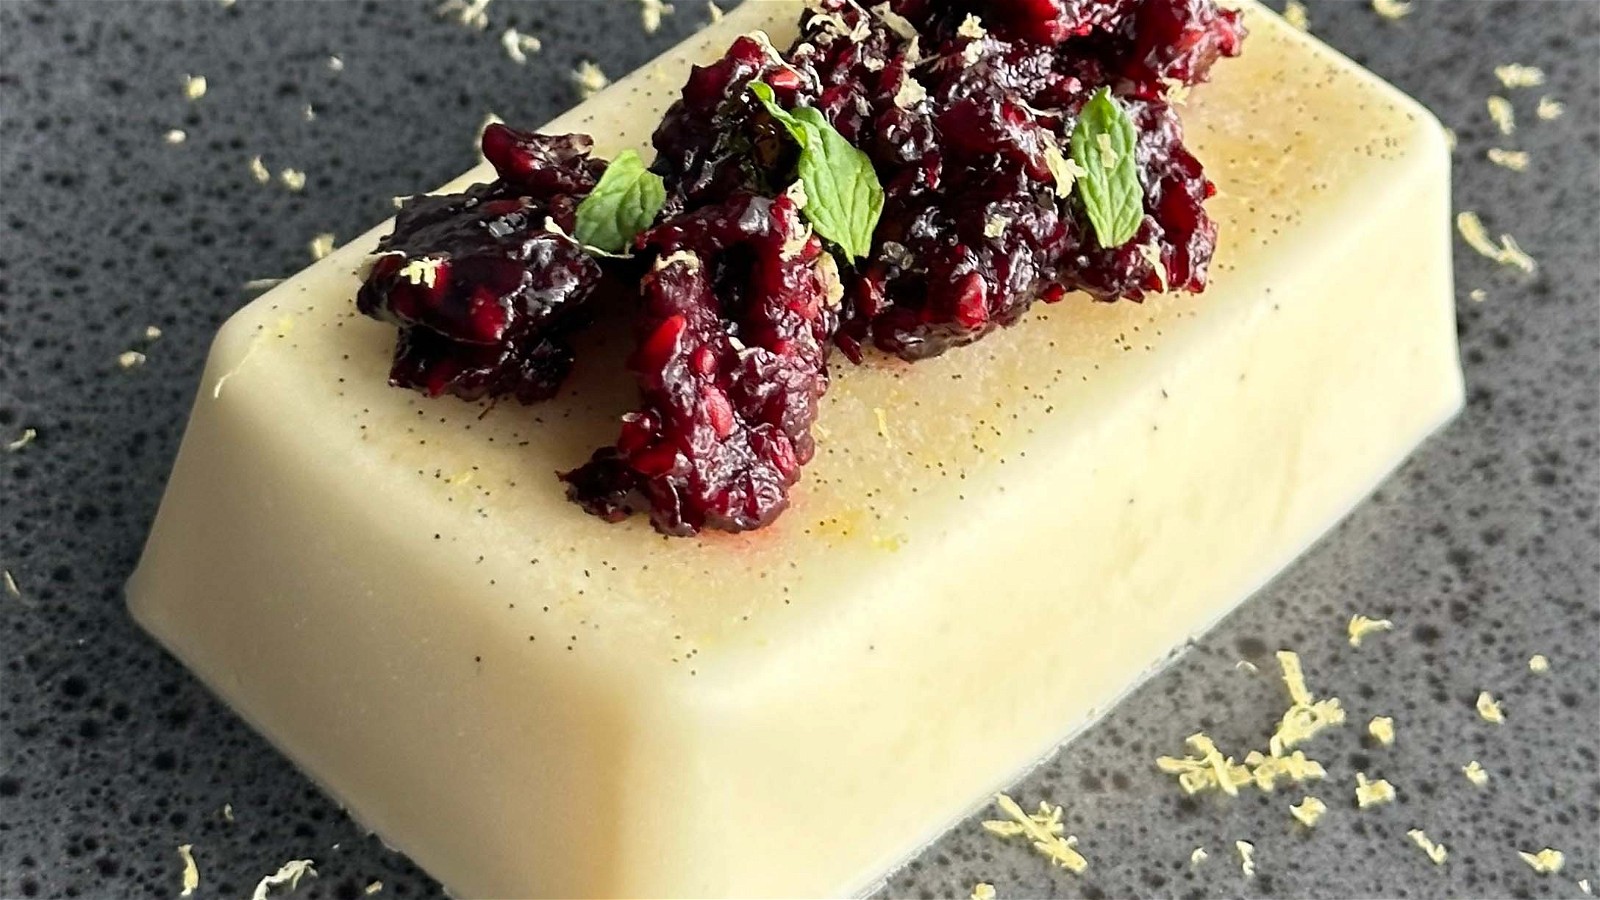 Image of Zesty Delight: Lemon Panna Cotta with Blackberry Compote